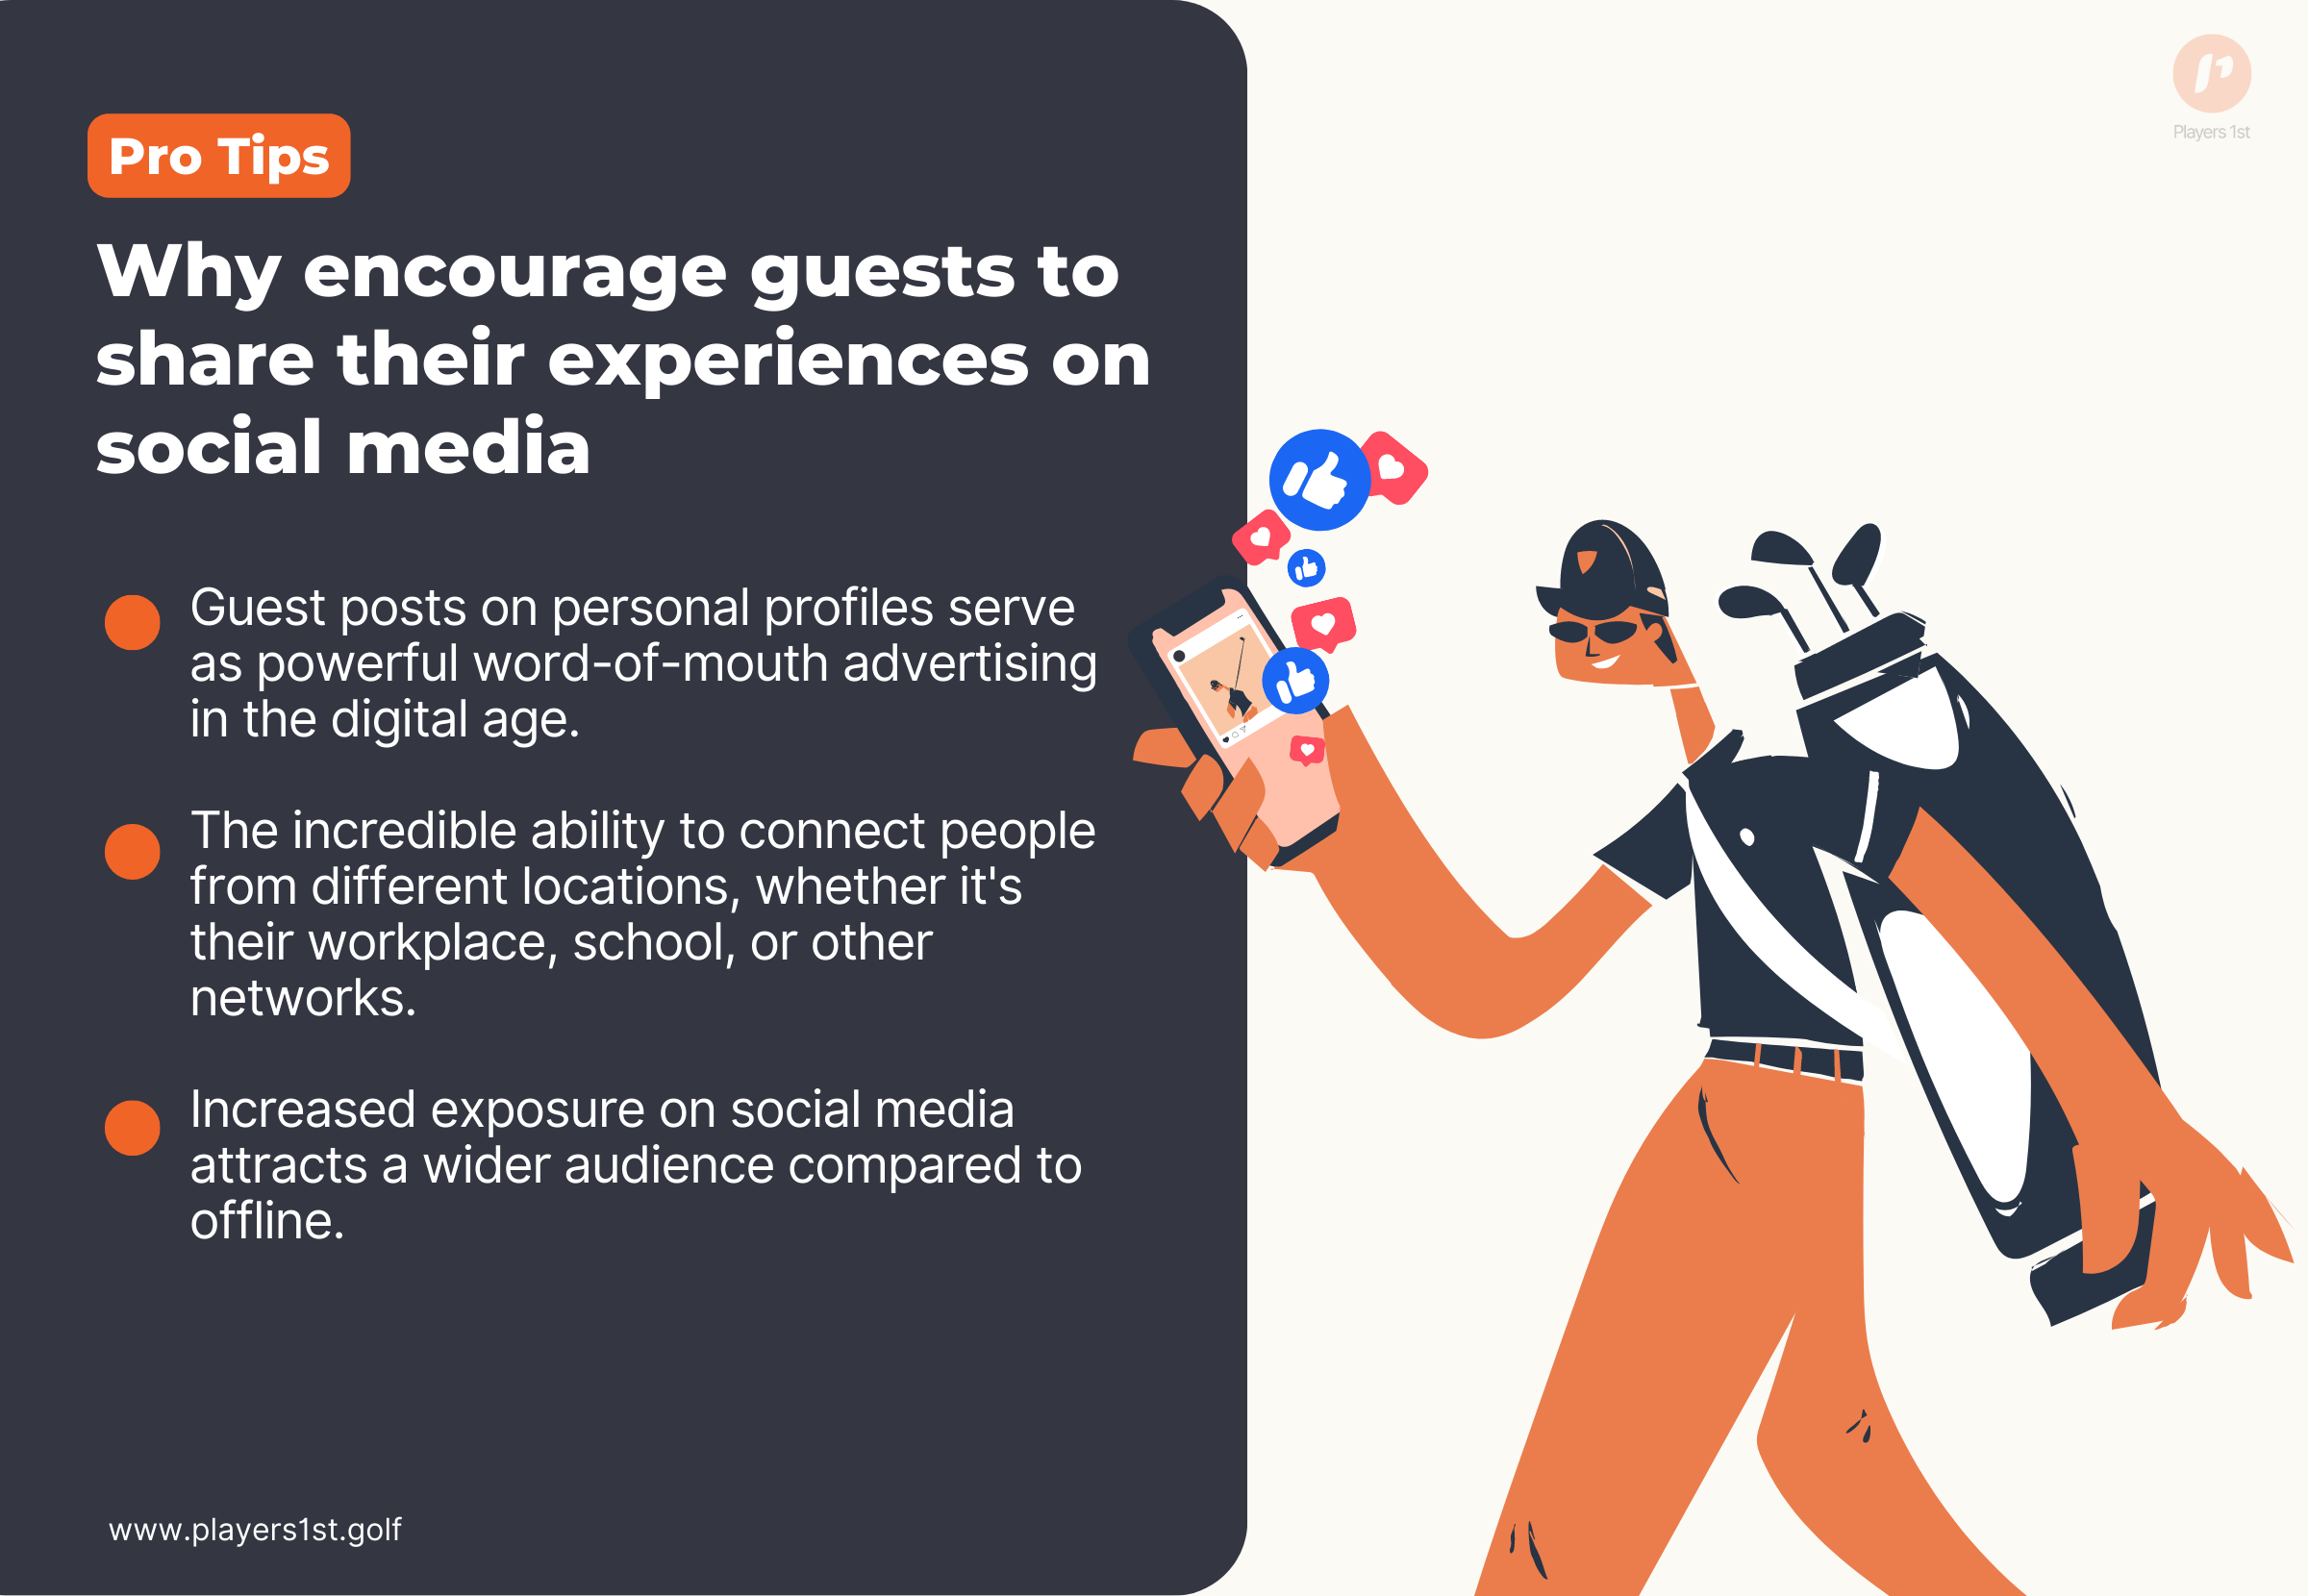 Why encourage guests to share their experiences on social media.